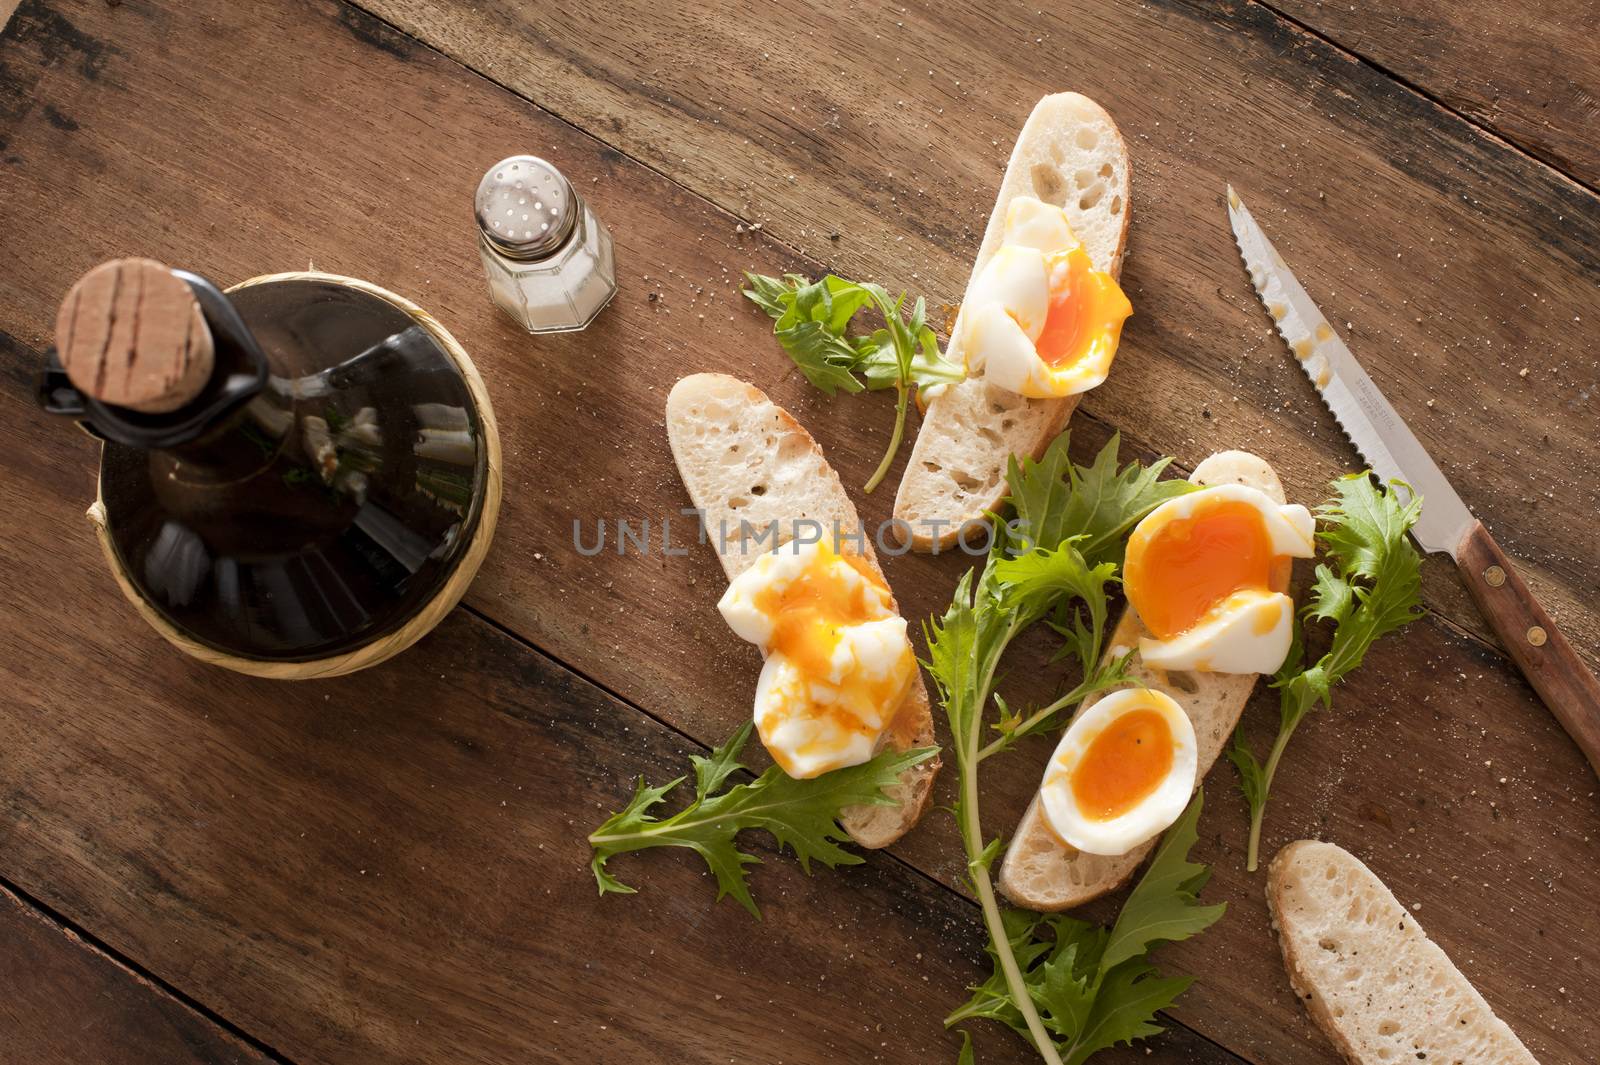 Snack of hard boiled eggs and herbs on baguette by stockarch